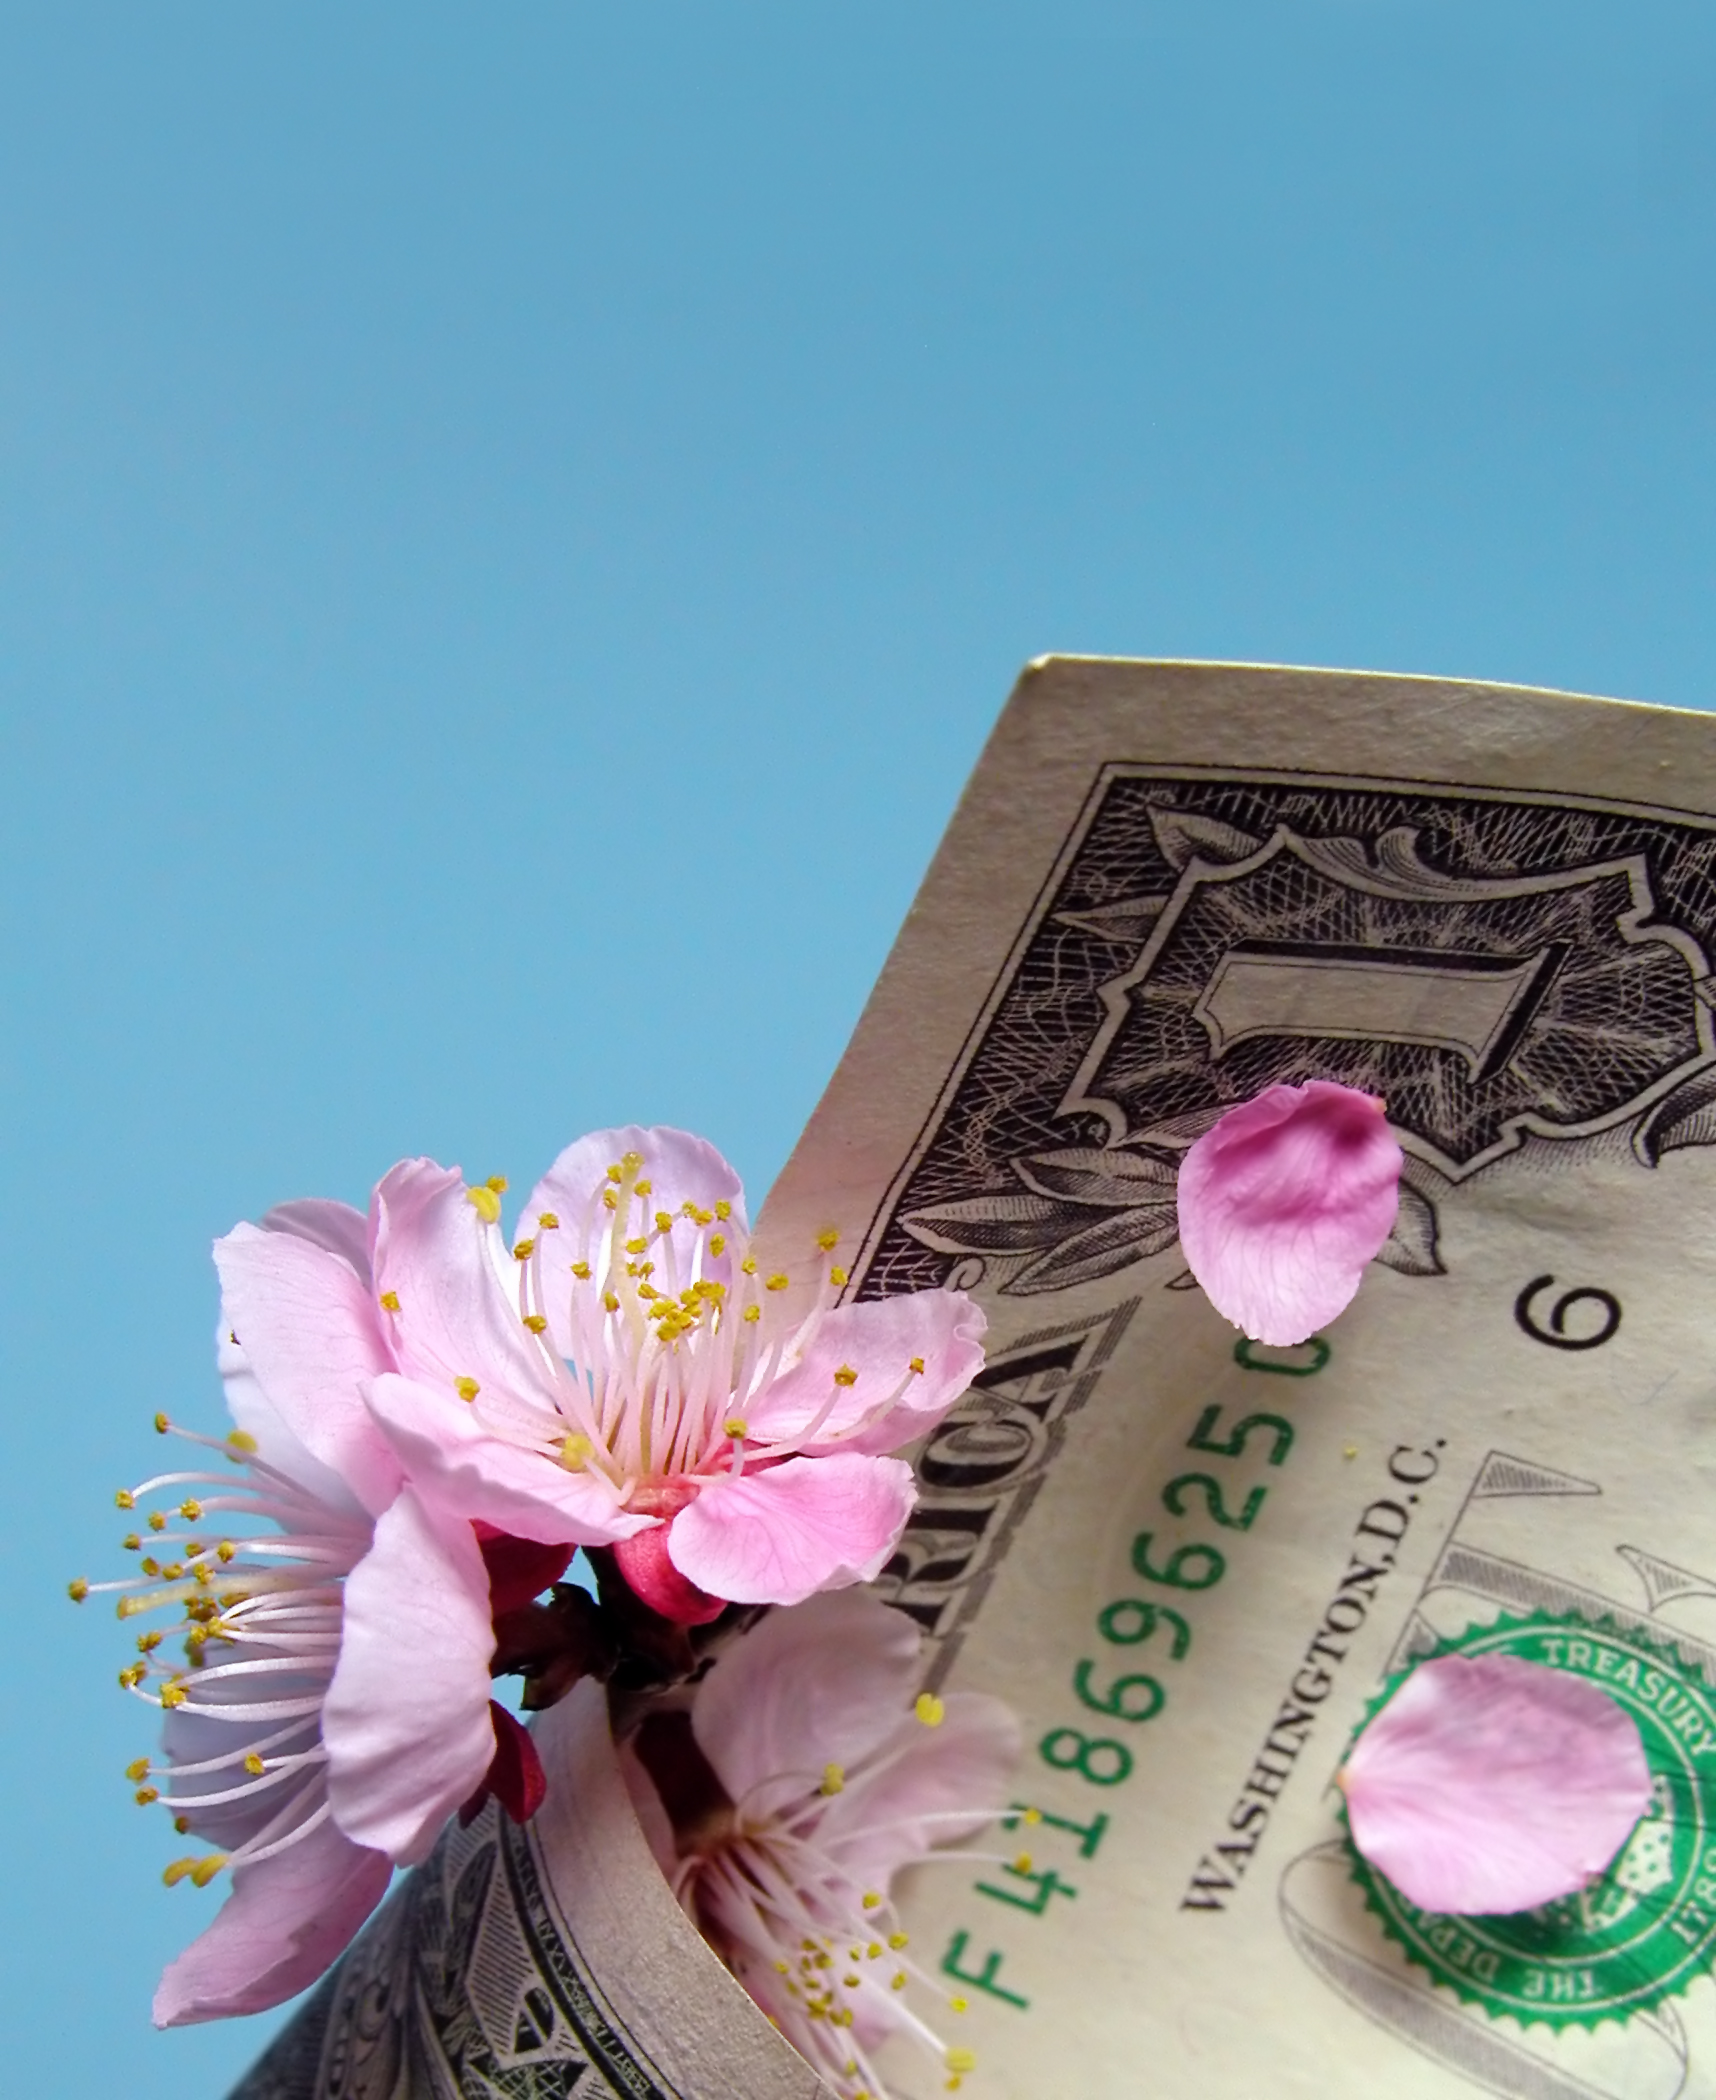 Cherry flowers and petals in a dollar bill cornet